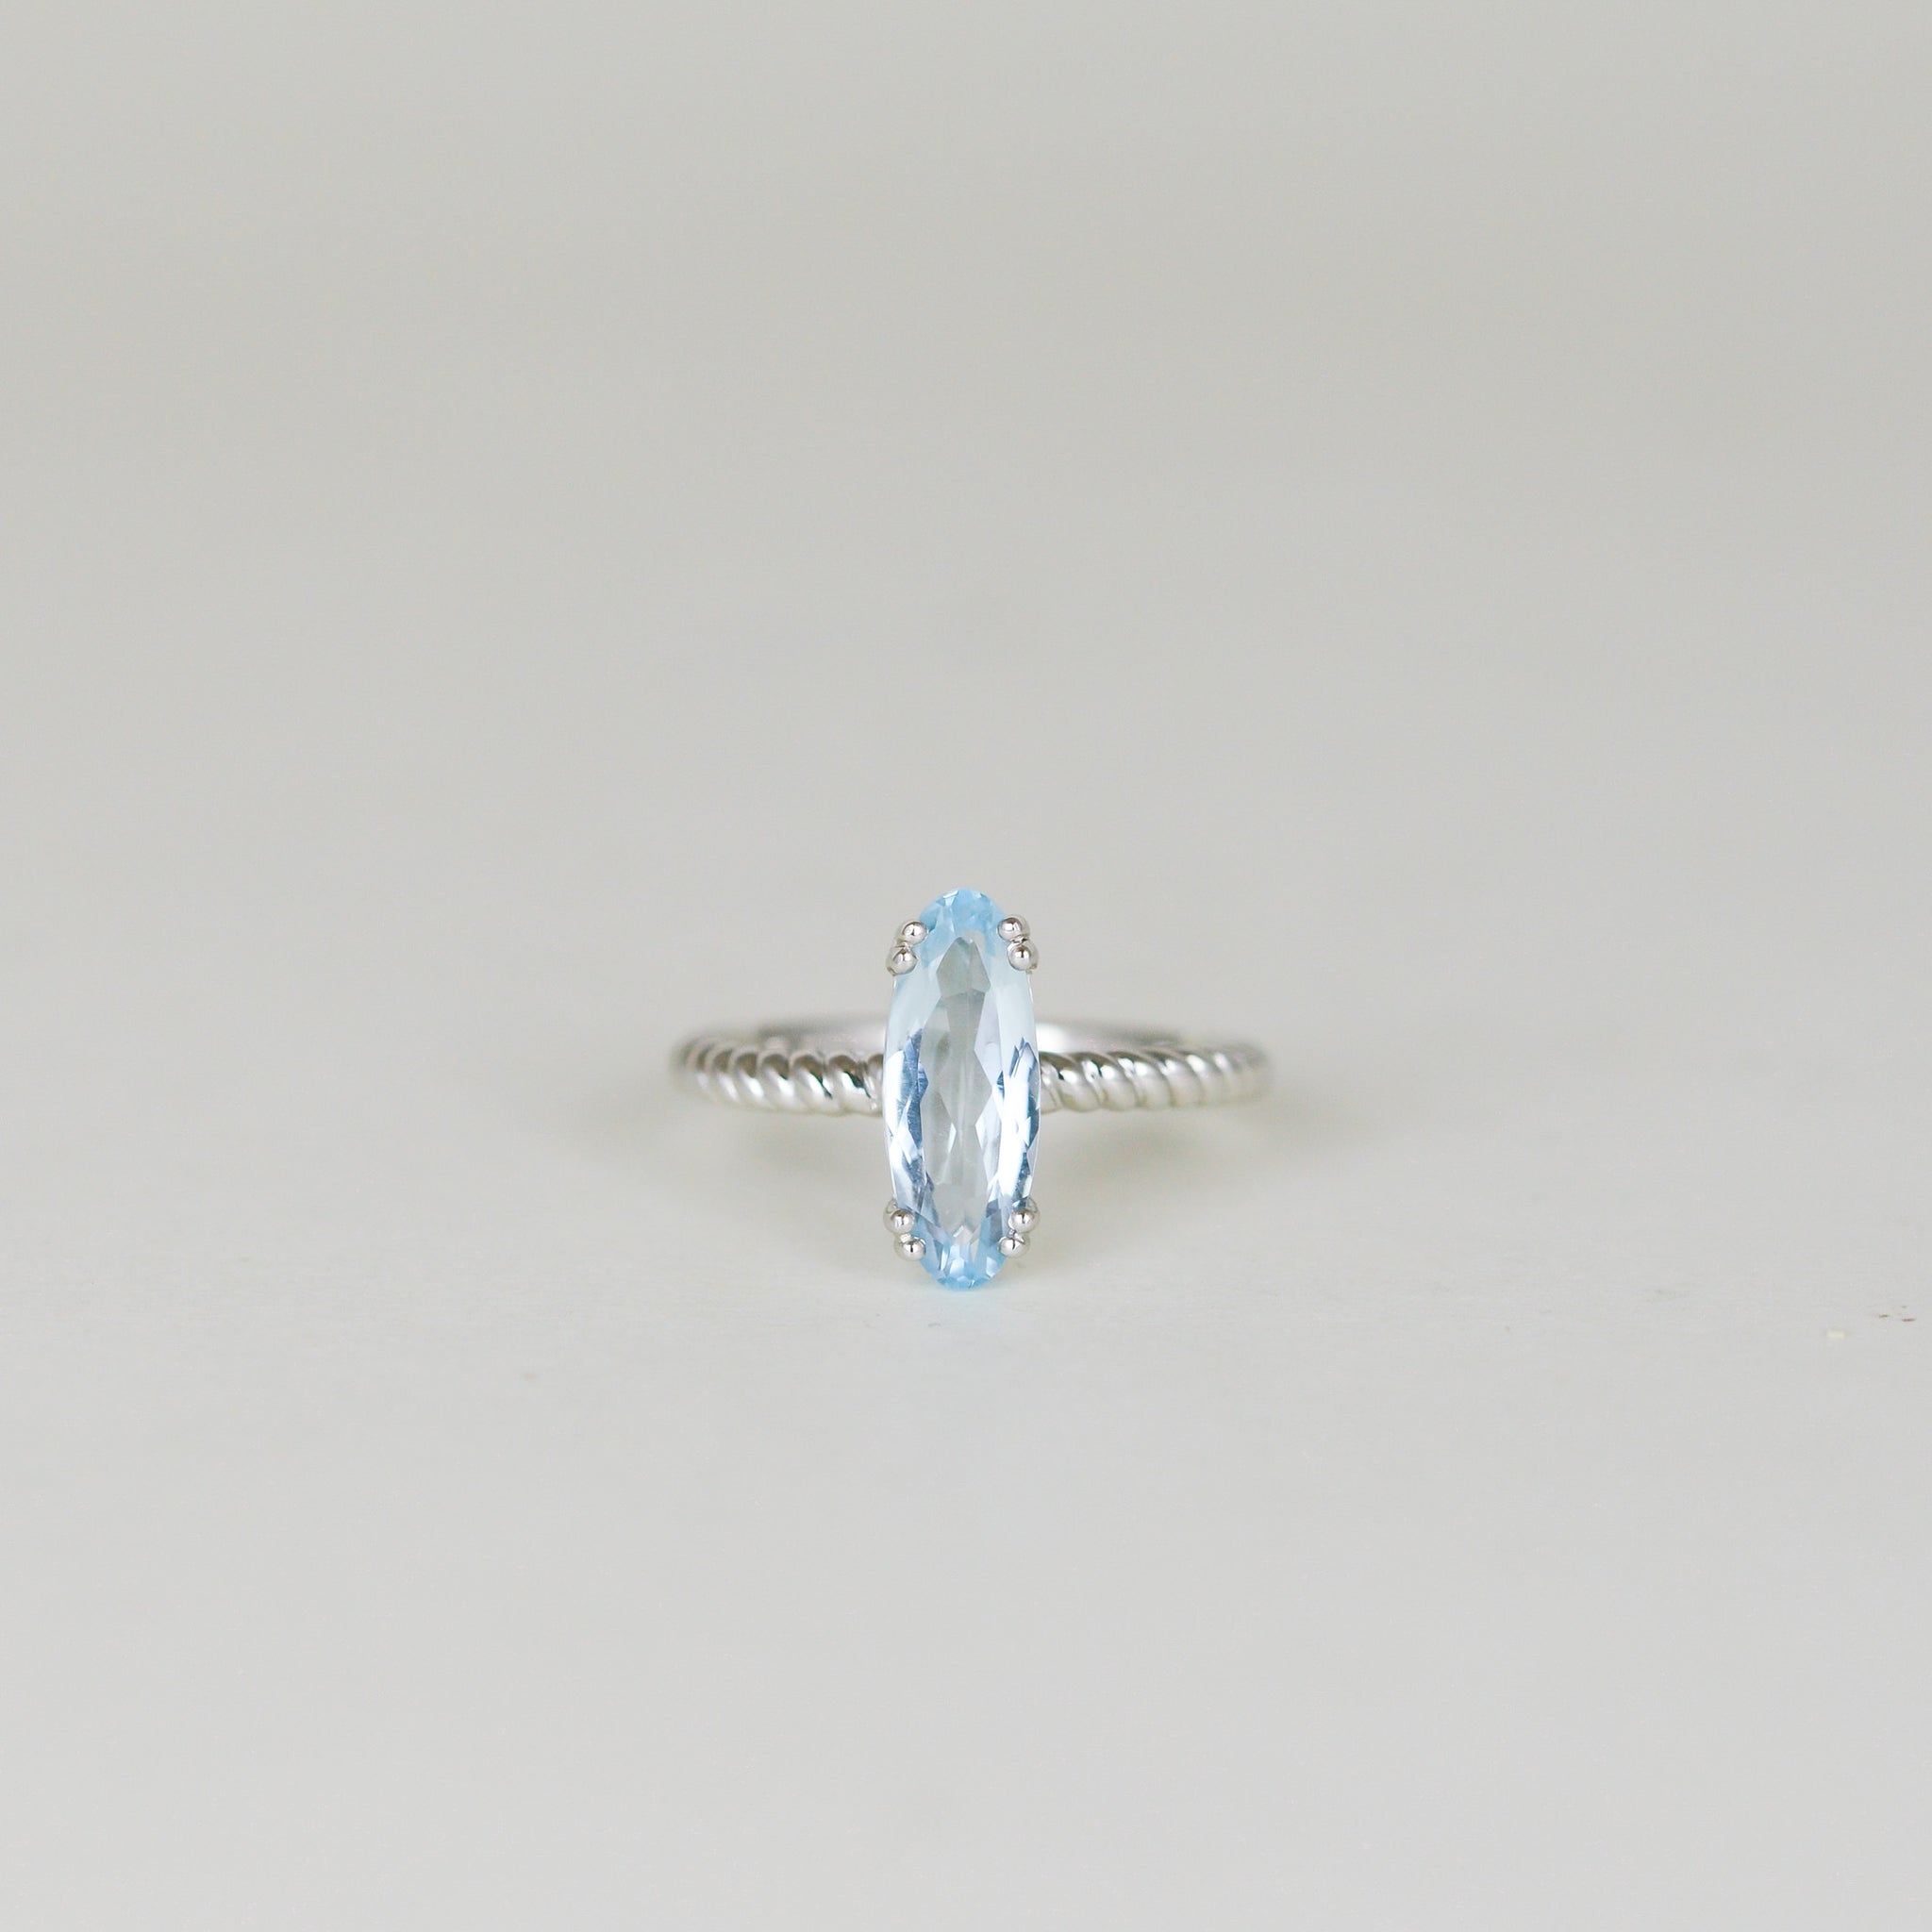 9ct White Gold 1.78ct Elongated Oval Blue Topaz Dress Ring